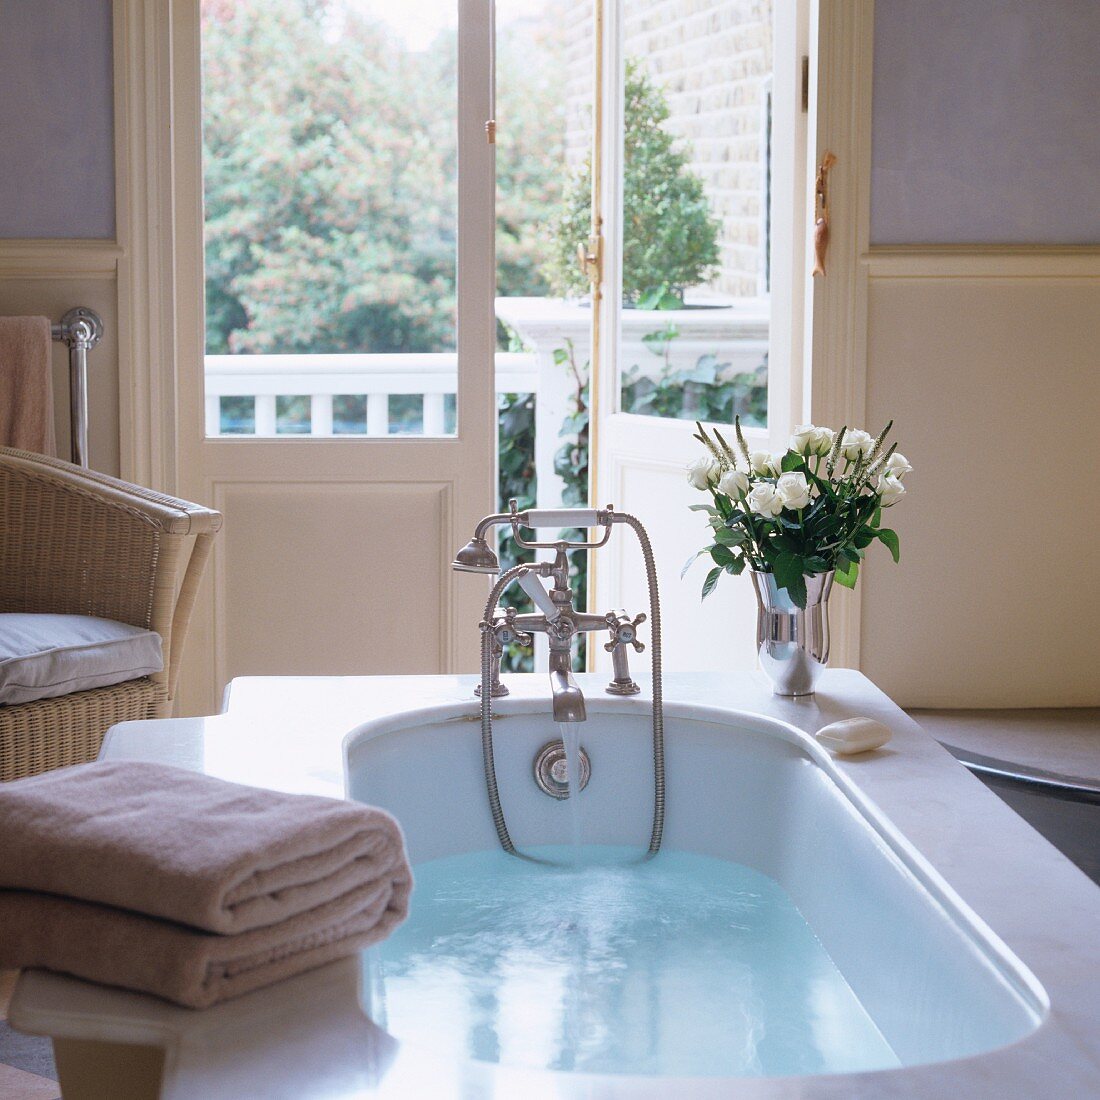 Bathwater in vintage bathtub with vase of white roses on bath surround and view into garden through half-open French doors